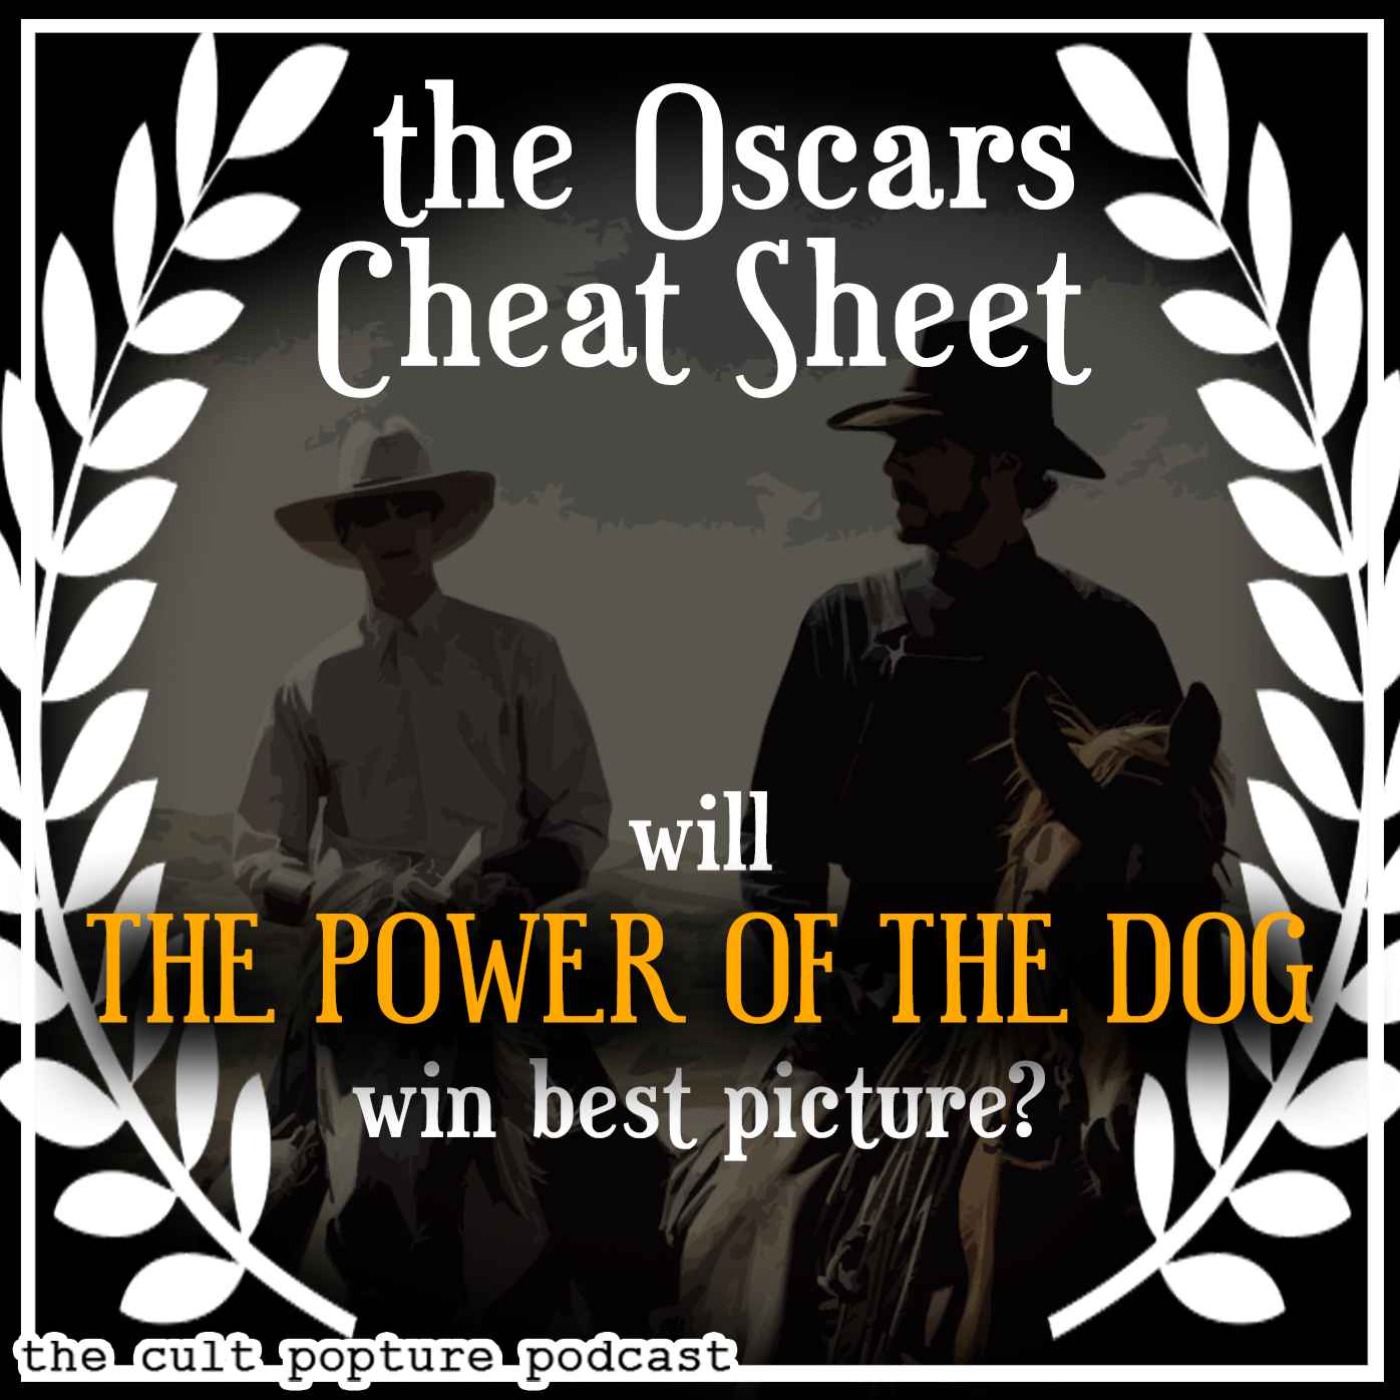 Will THE POWER OF THE DOG Win Best Picture? | The Oscars Cheat Sheet